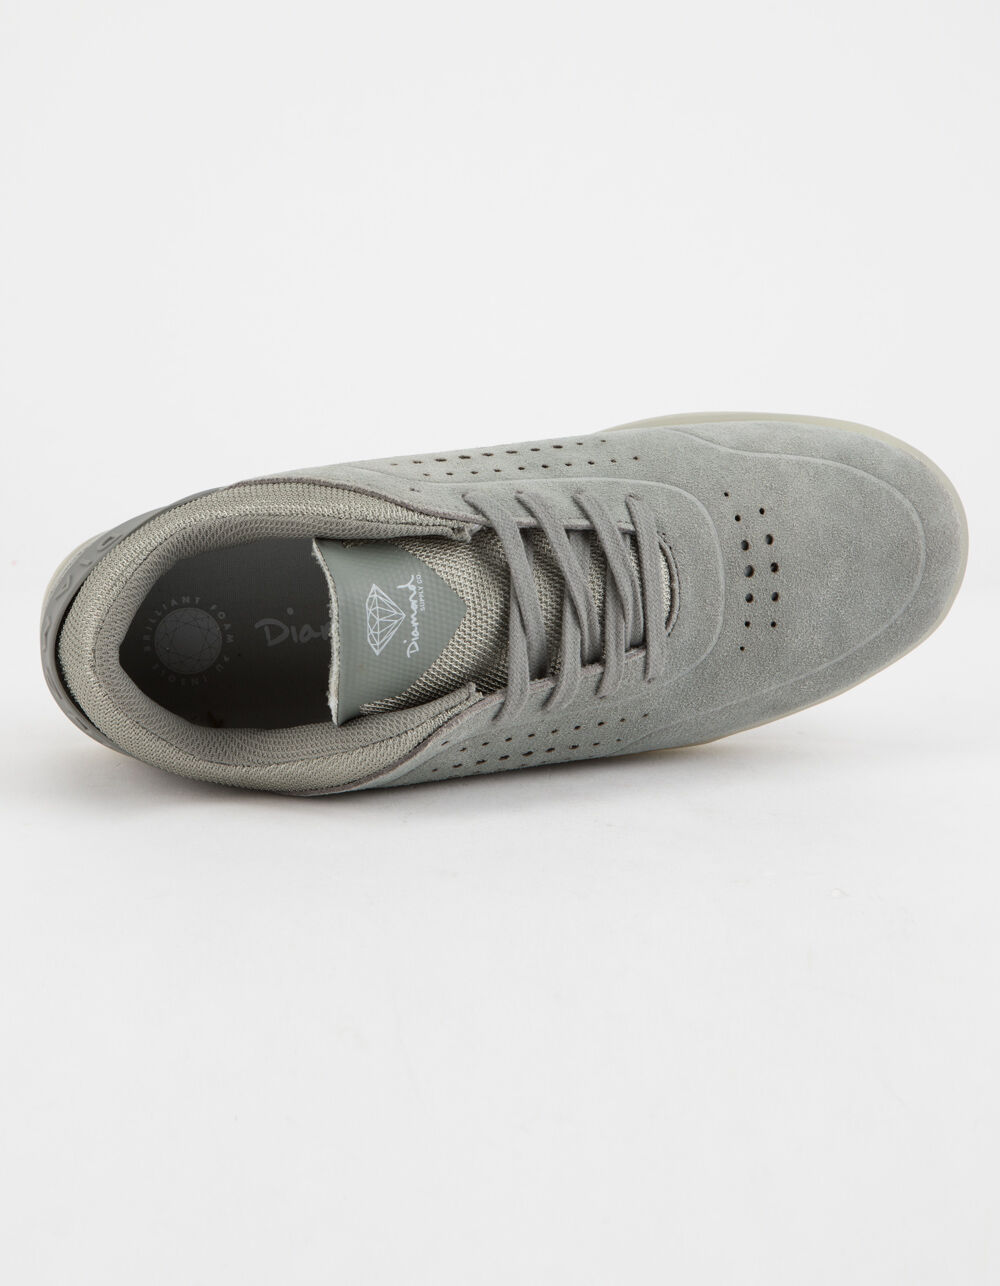 DIAMOND SUPPLY CO. Graphite Mens Shoes image number 2